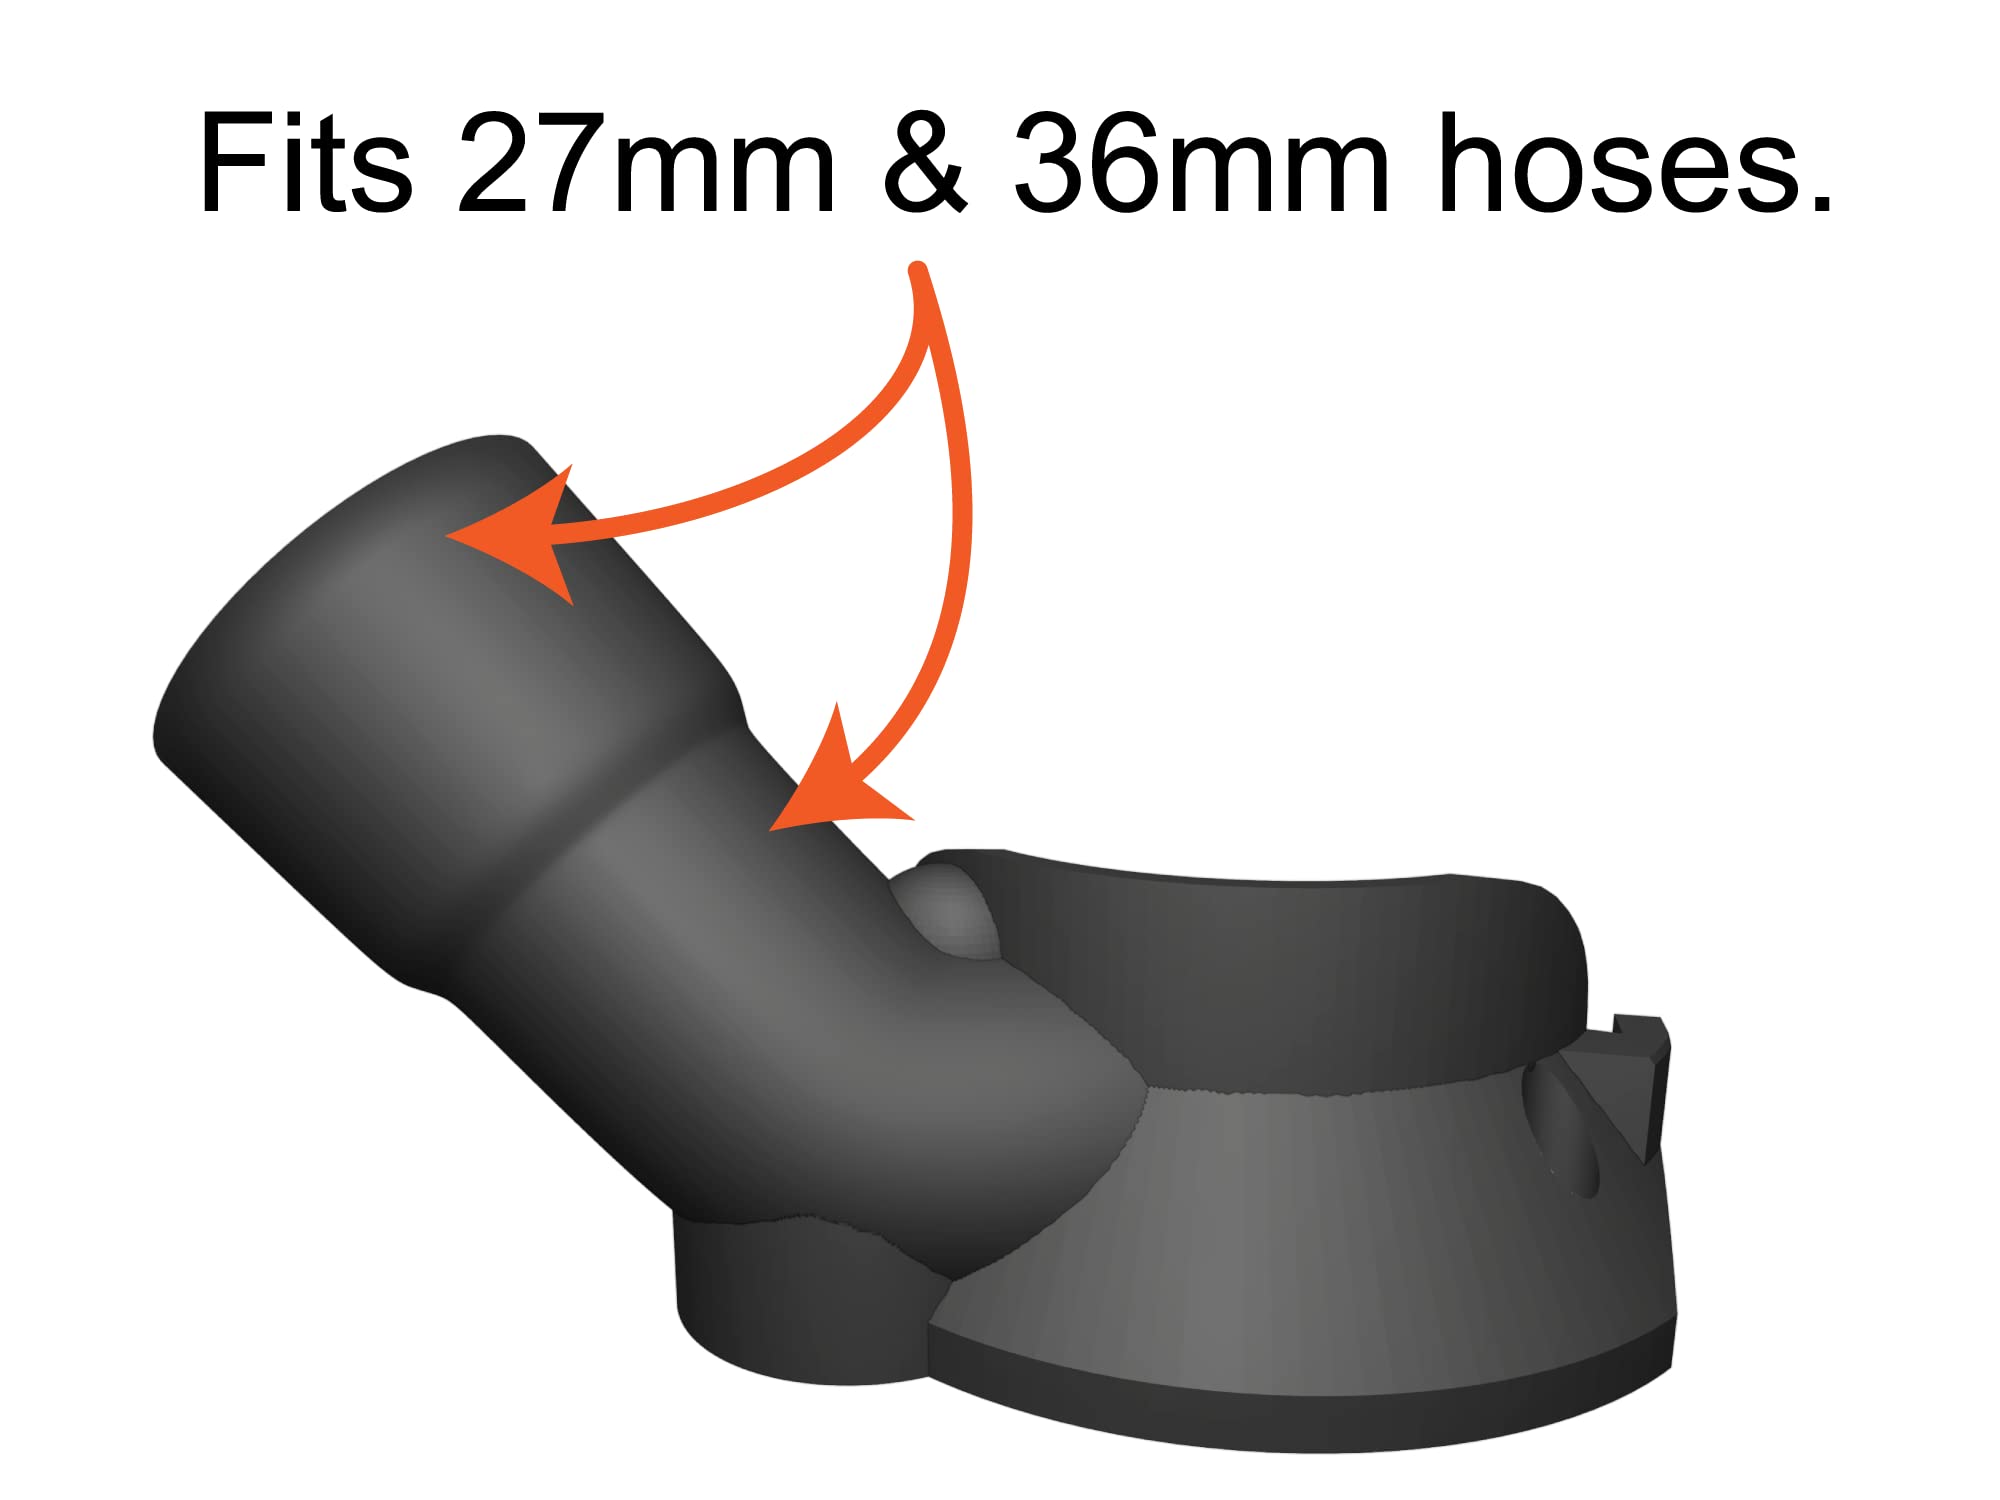 Trim Router Hose Adapter, Compatible with DeWalt DCW600 and DWP611 to Festool 27mm and 36mm Hose, Black